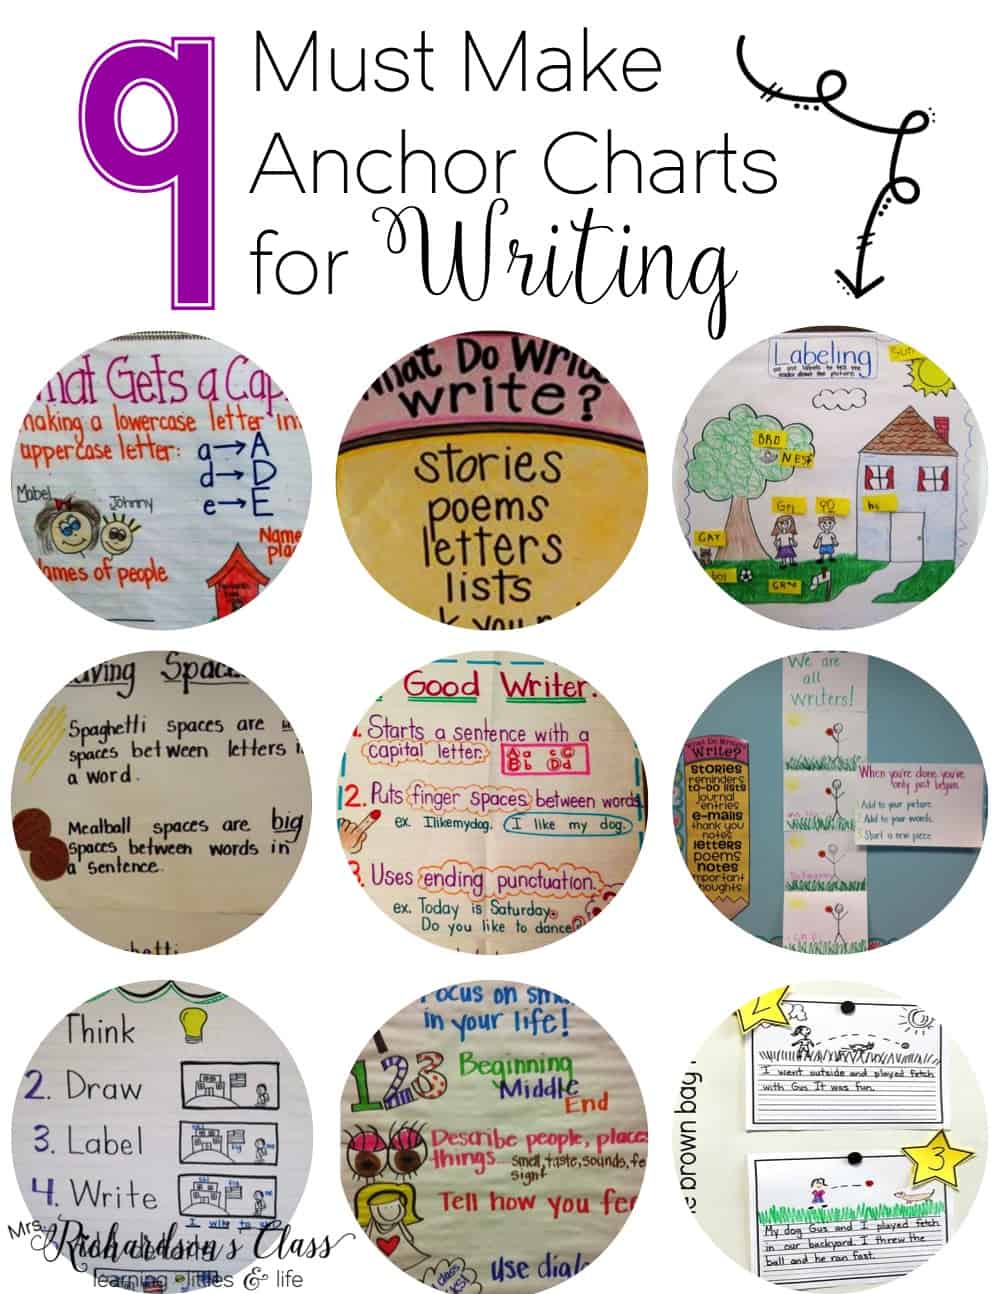 Tips and Tricks for Creating Anchor Charts in the K-2 Classroom